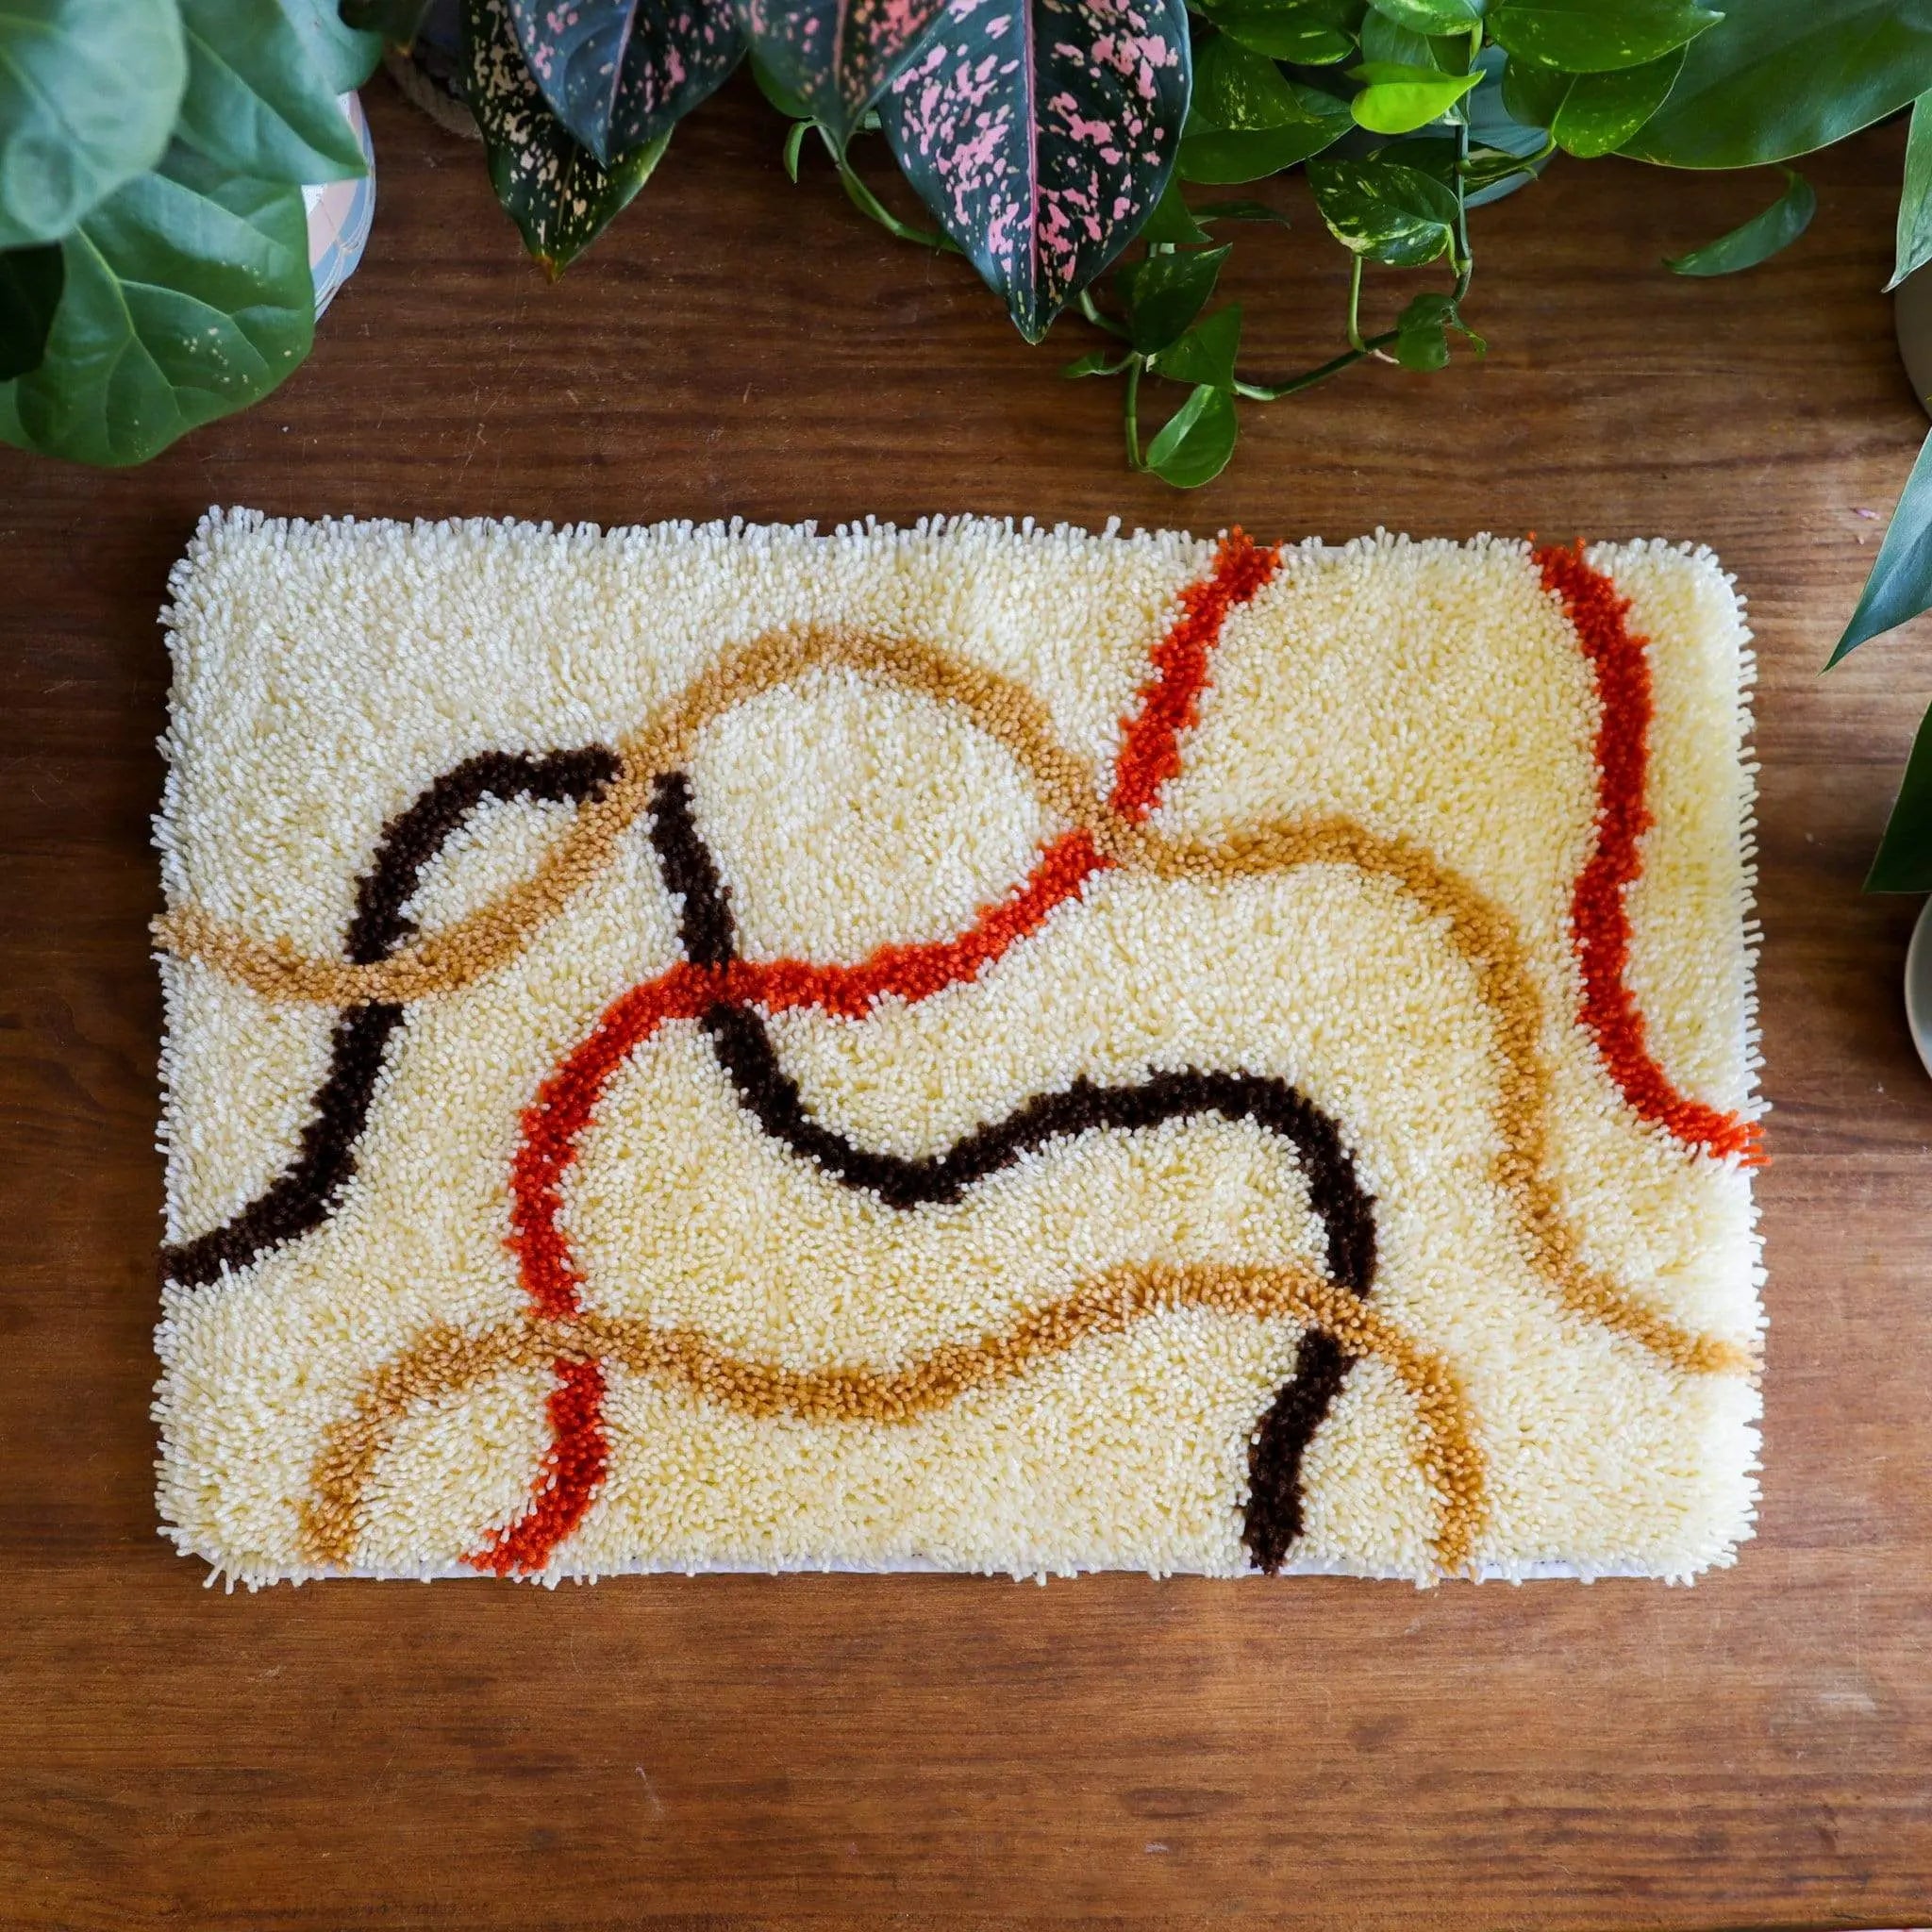 Craft Club Co FLOW Rug Making Kit. This rug is a rectangle shape and has a cream background with swirling lines across the design. the lines are in light brown, dark brown and deep orange.